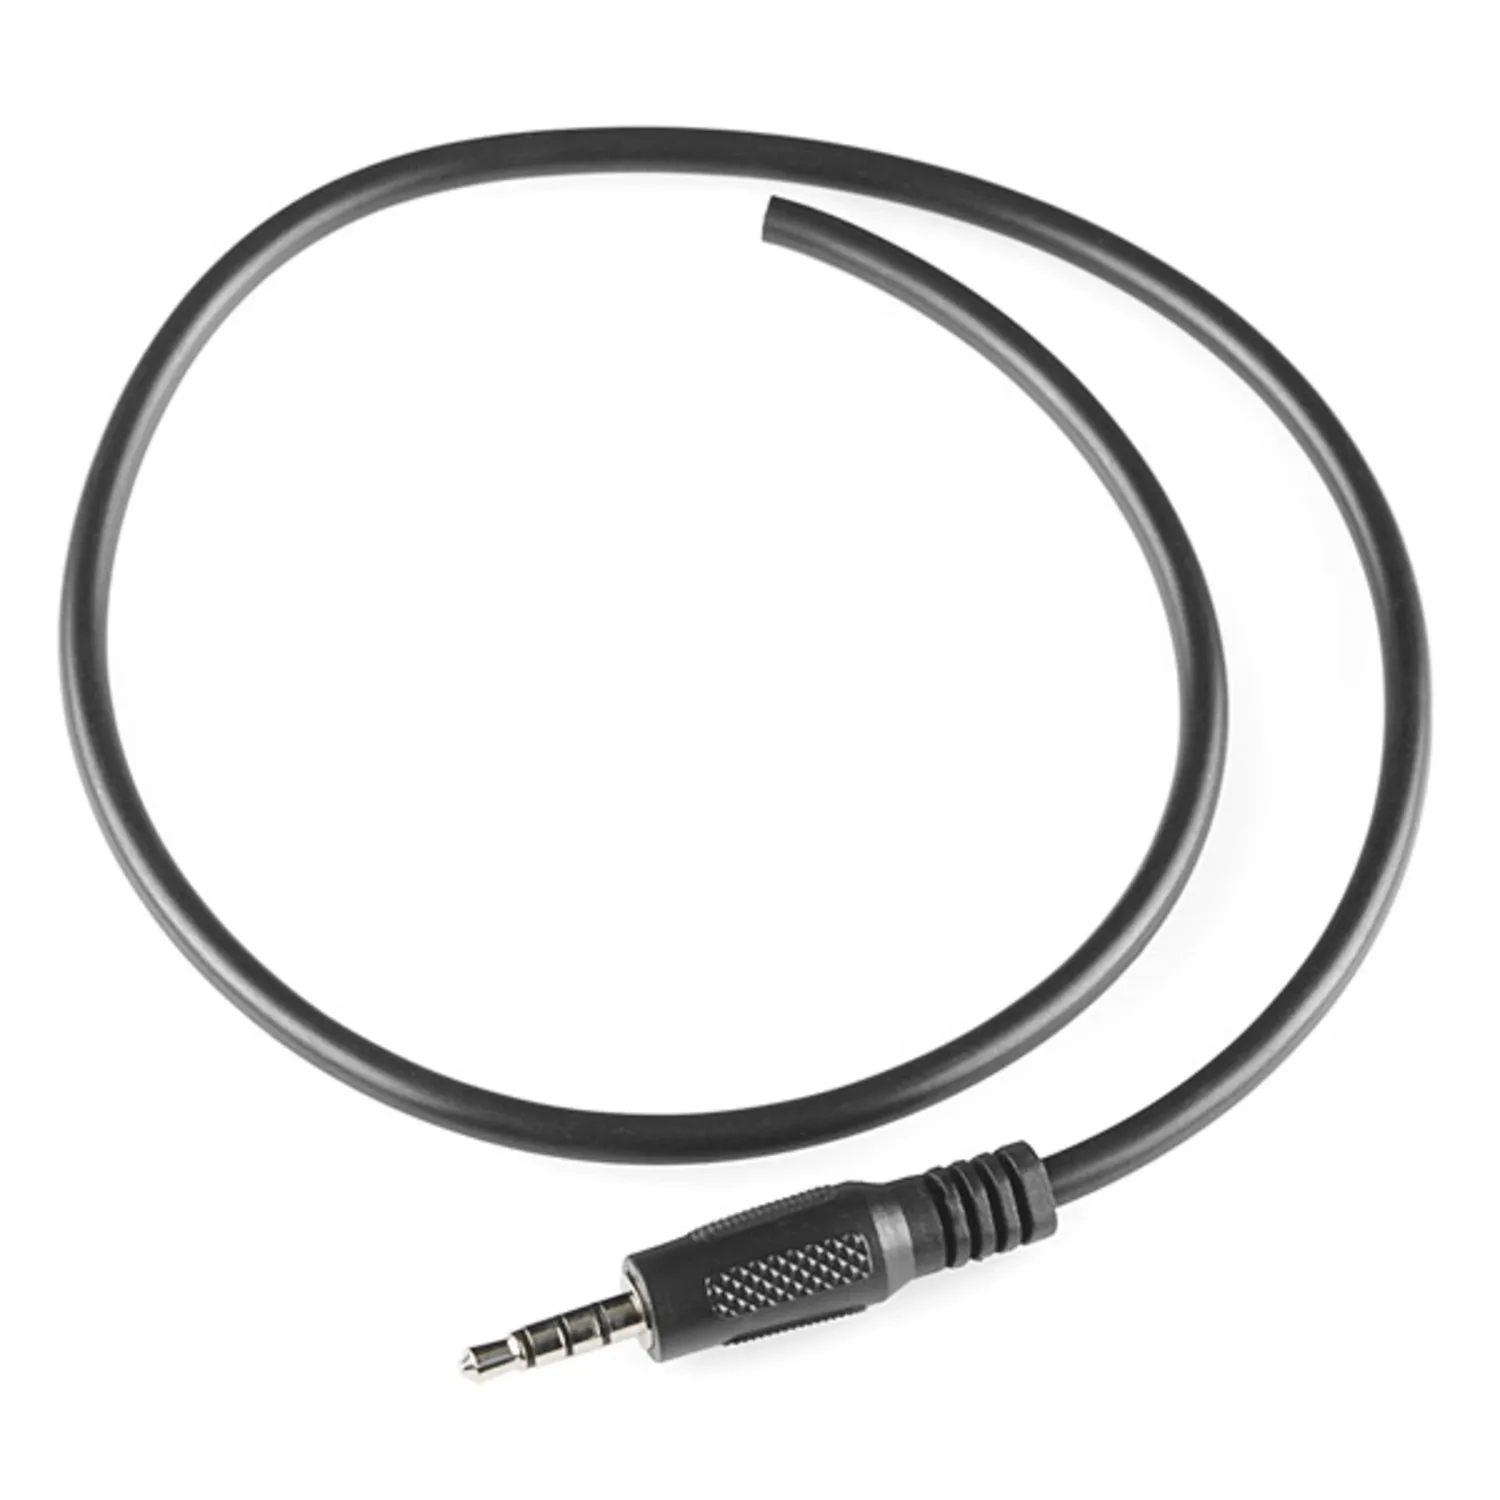 Photo of Audio Cable TRRS - 18 (pigtail)